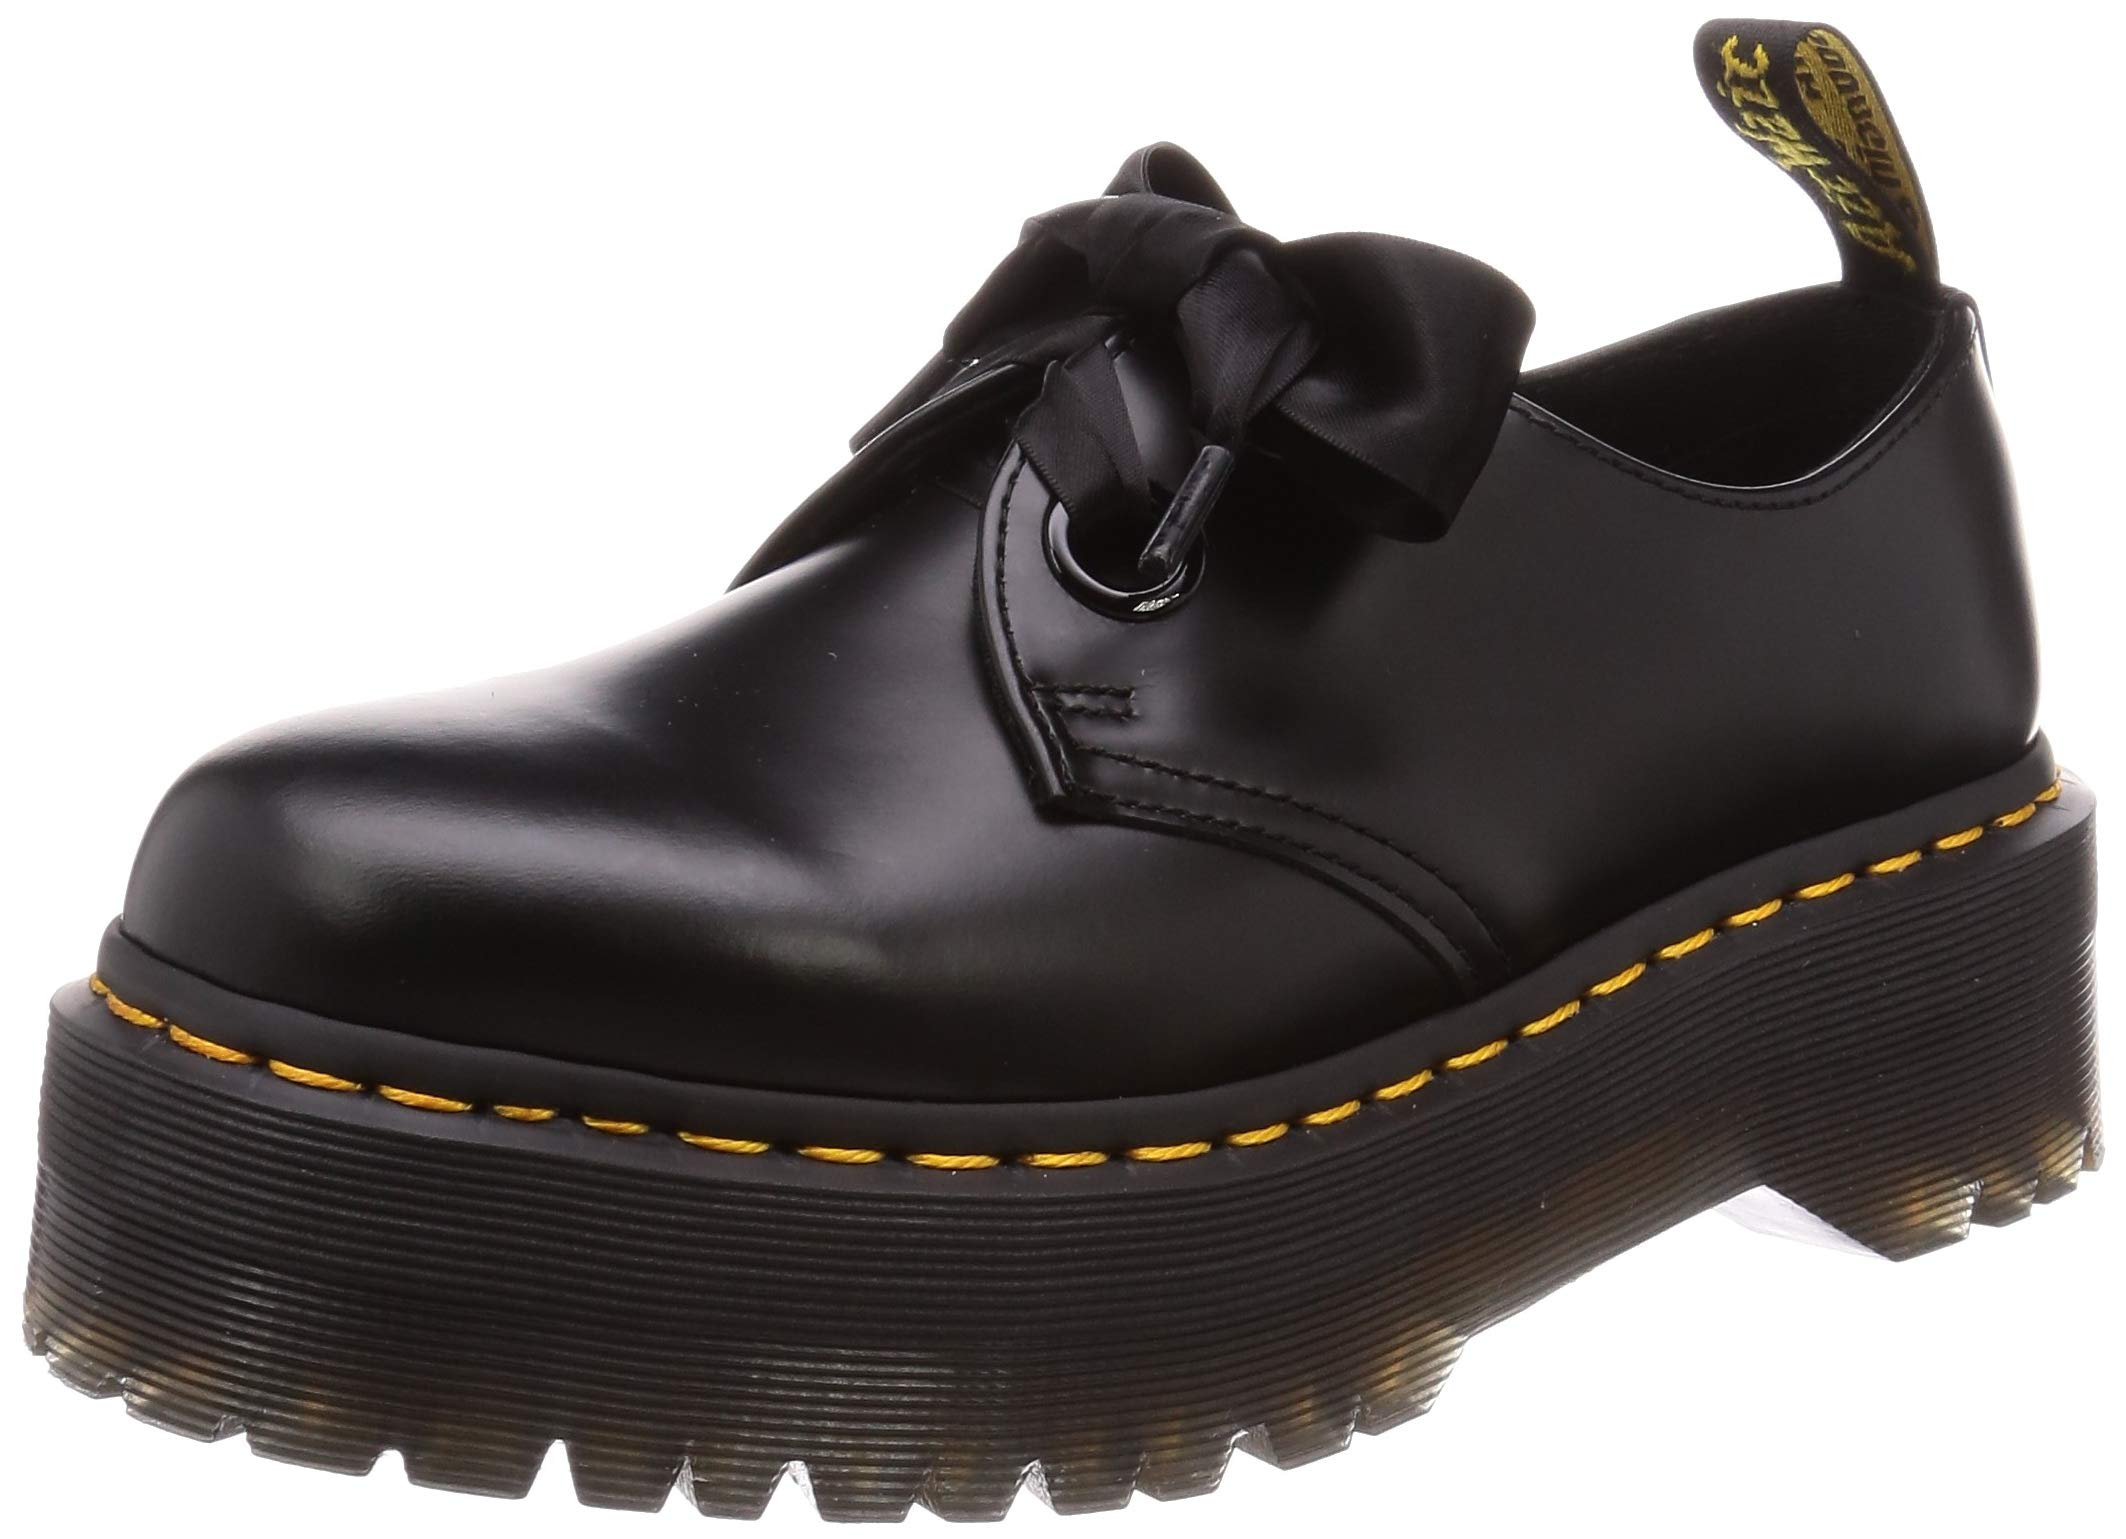 Dr. Martens Women's Holly Oxford